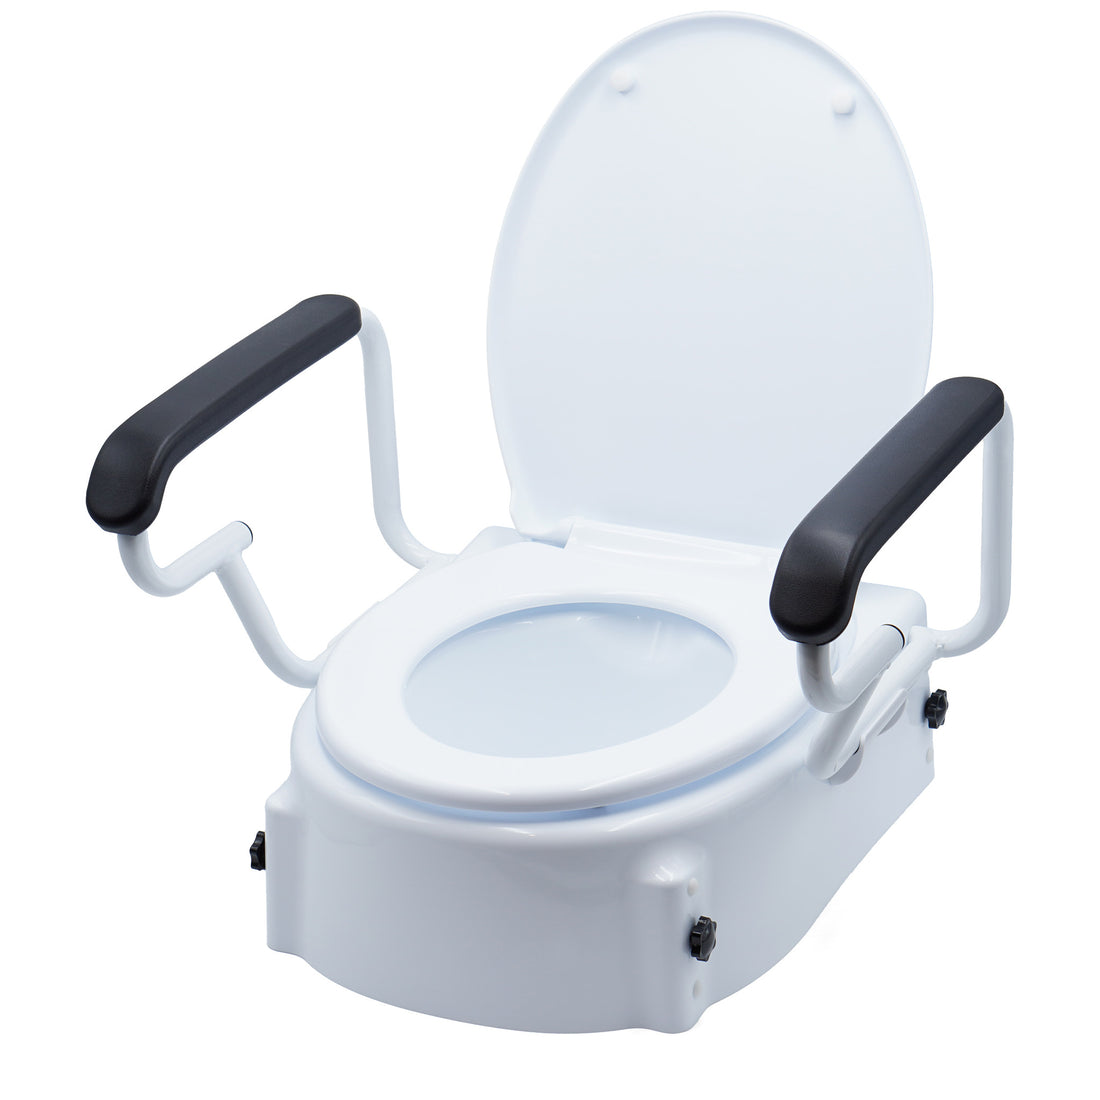 Toilet seat raiser front view with lid up